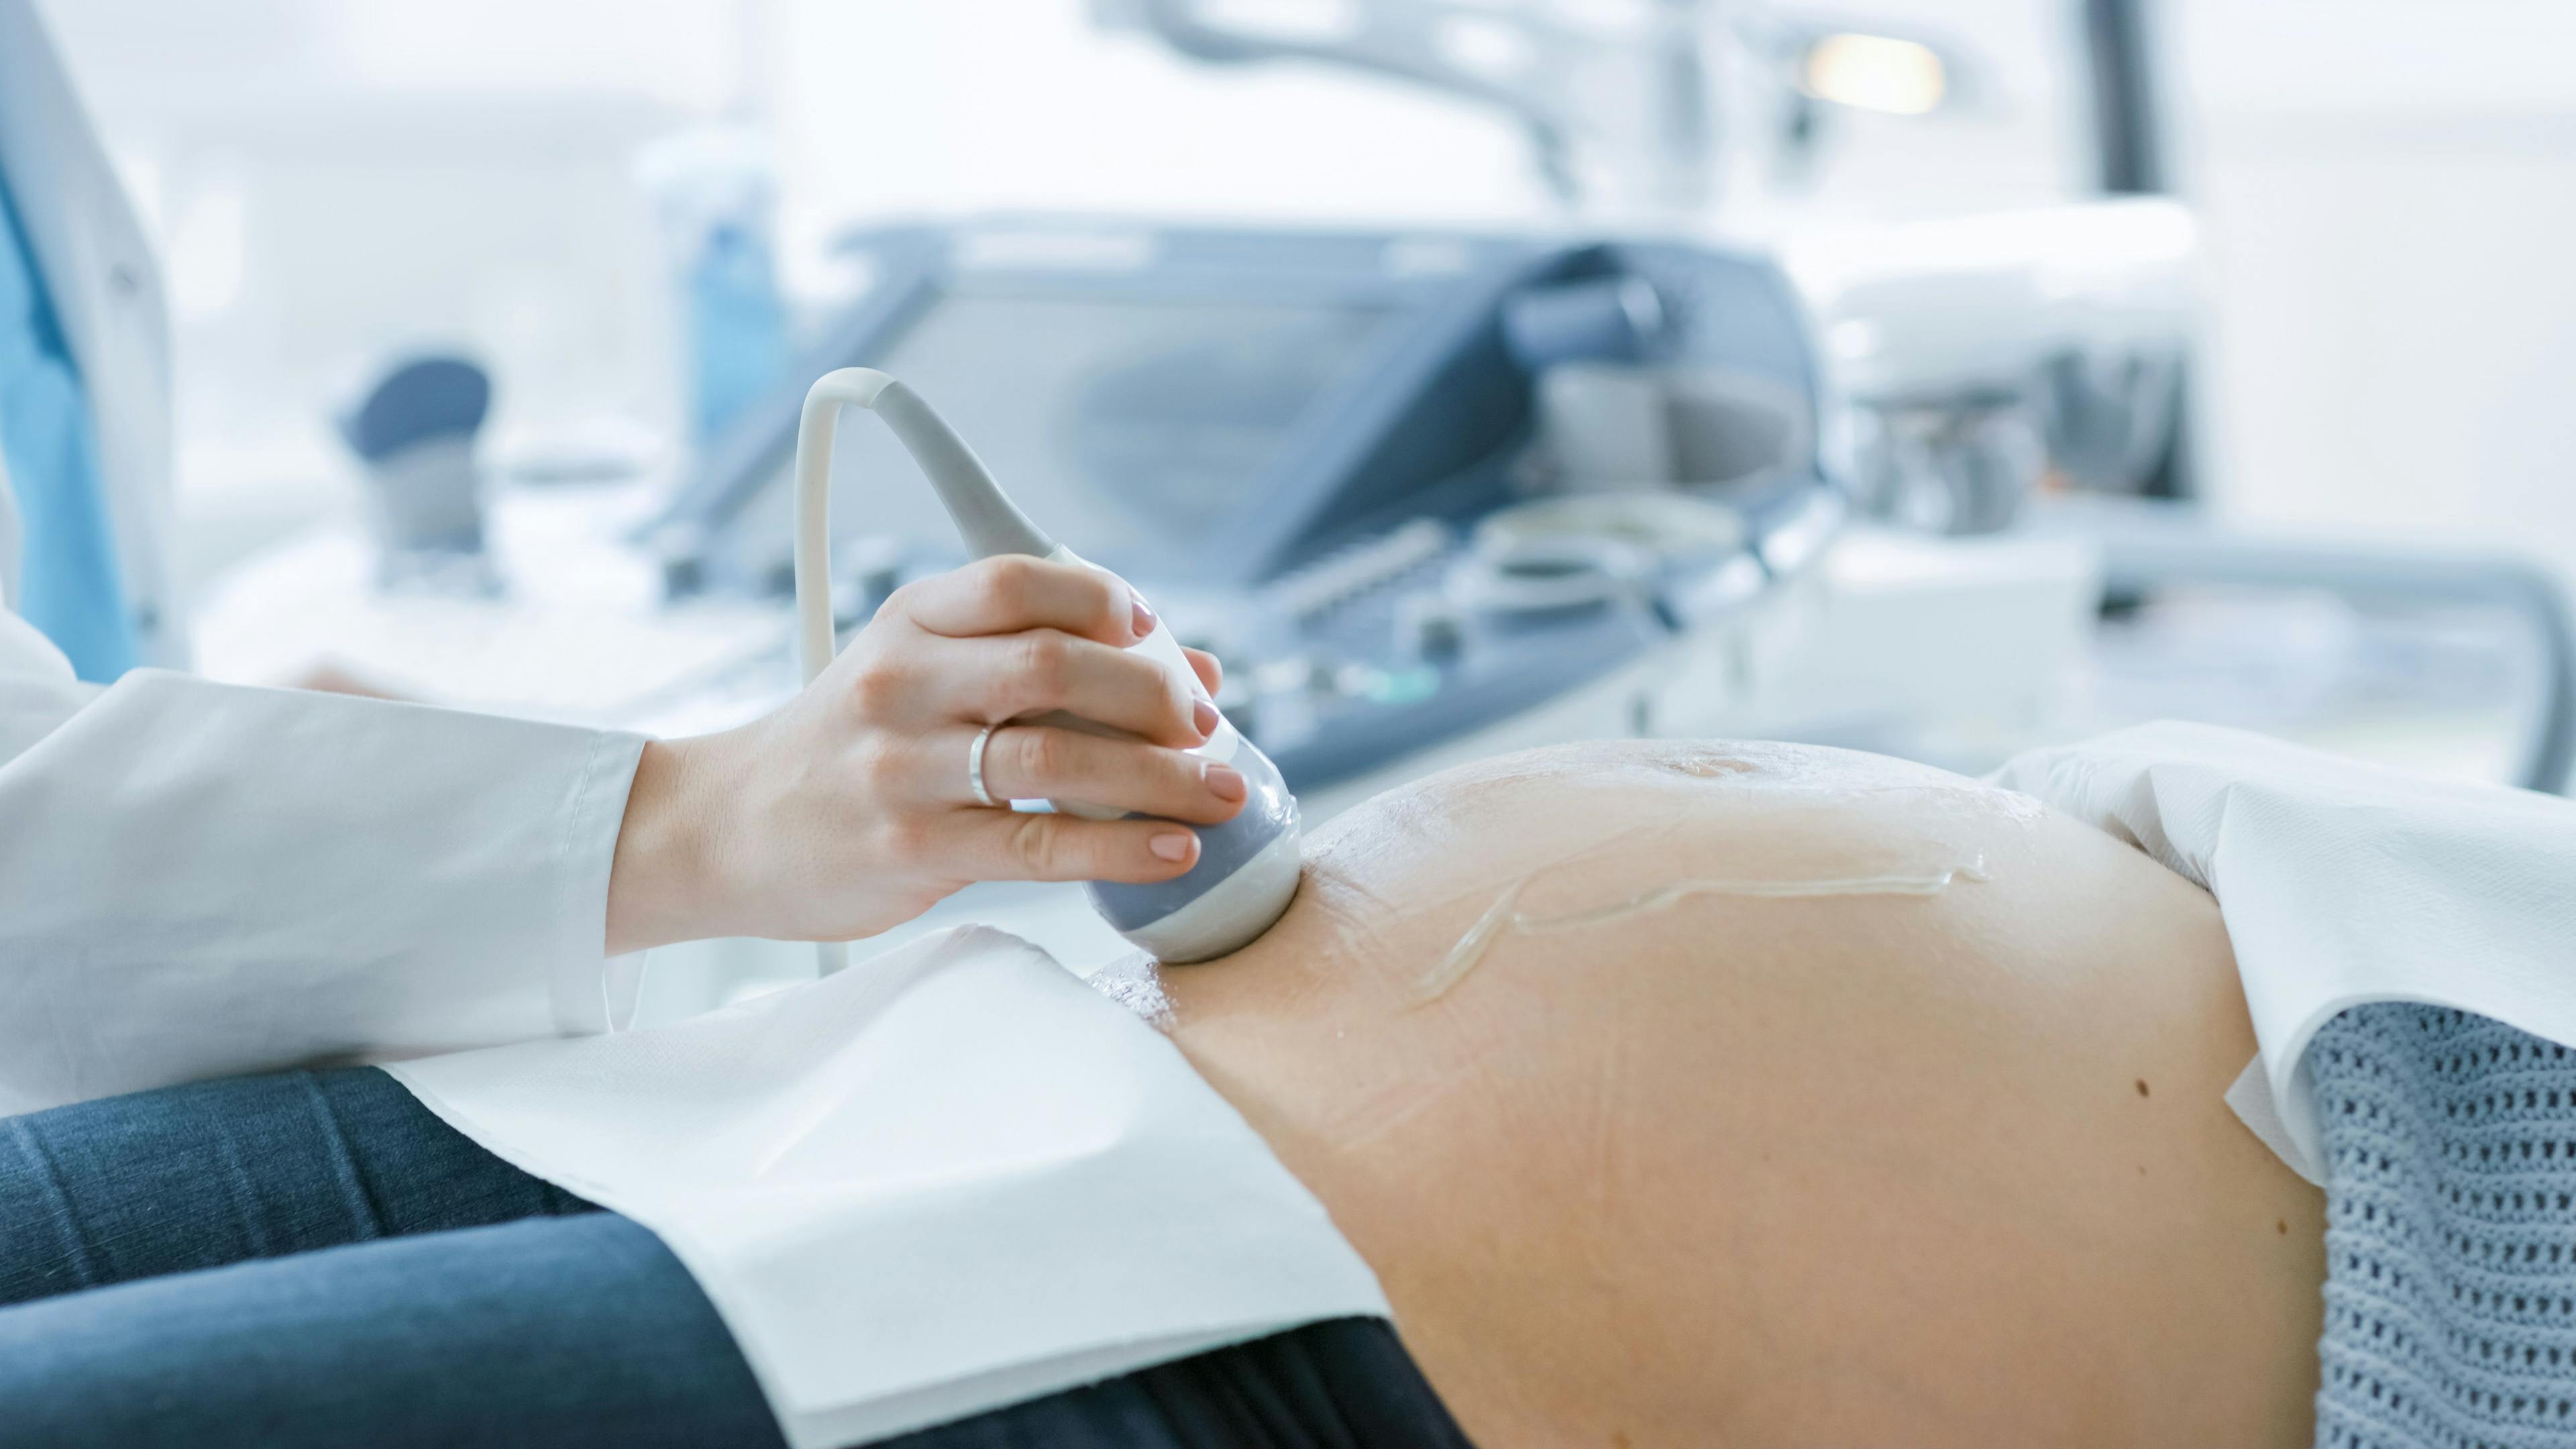 More women giving birth in hospitals have high blood pressure, CDC says